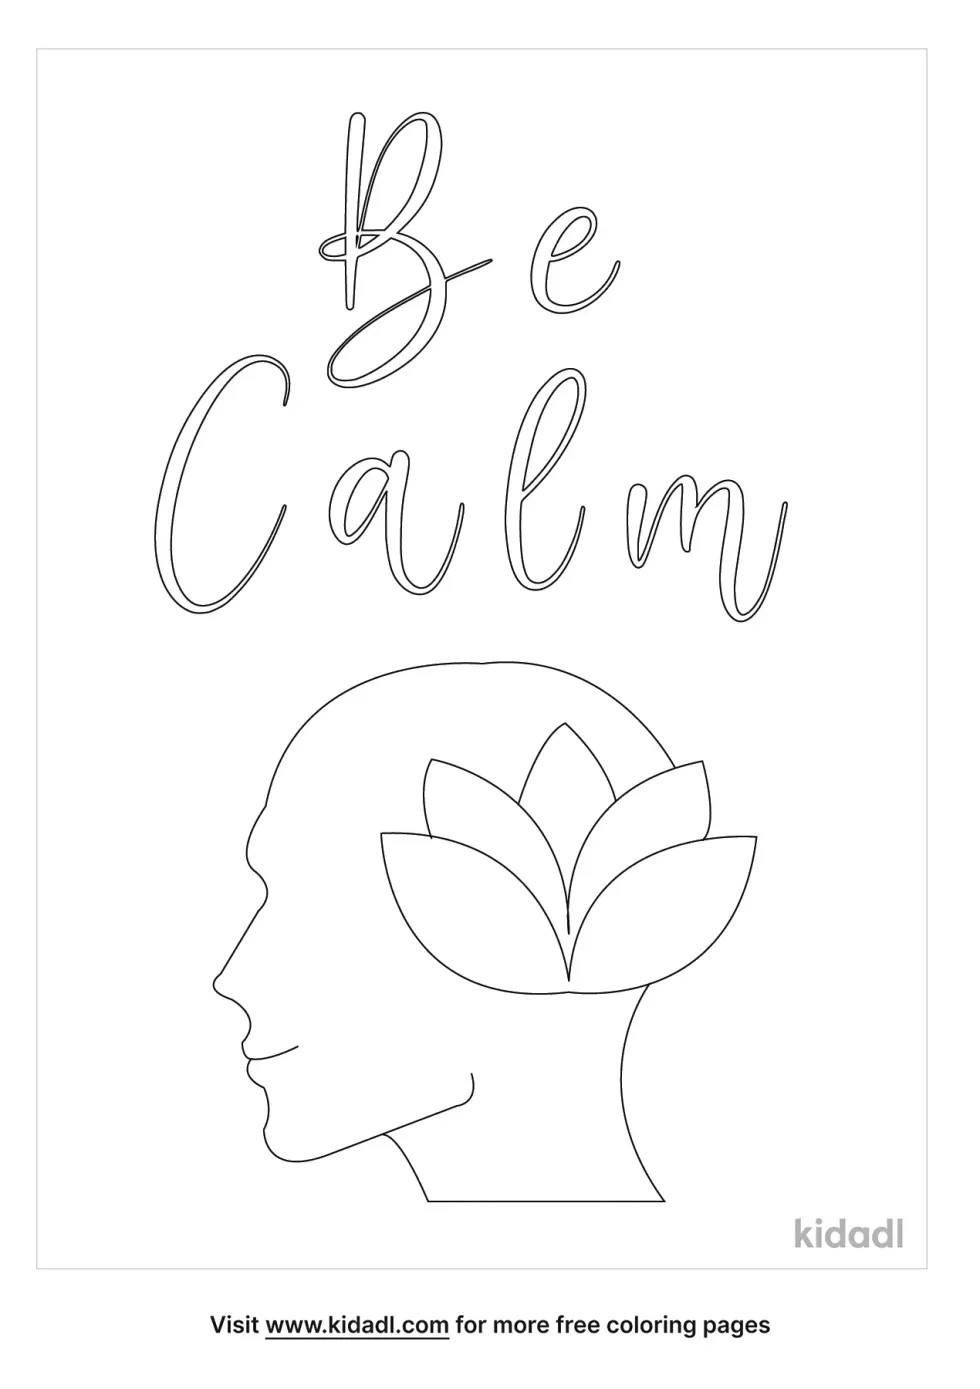 Be Calm Coloring Page